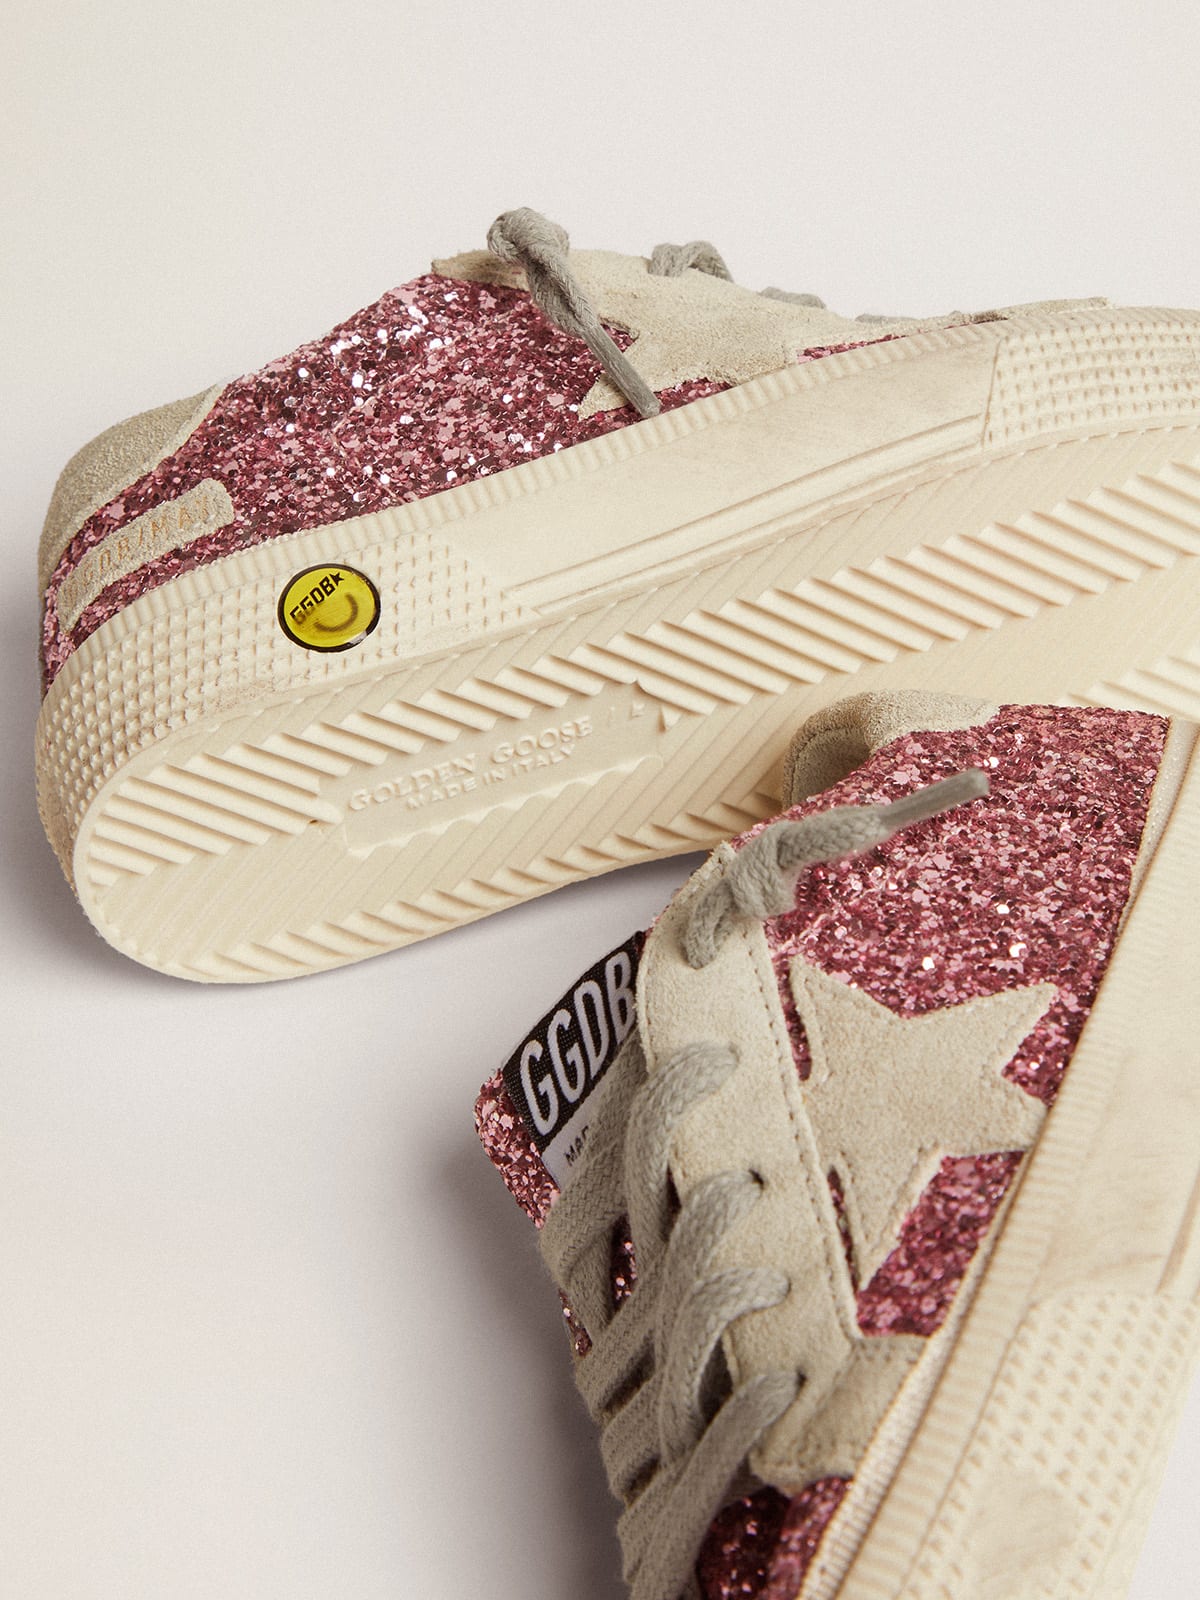 Golden Goose - May sneakers in pink glitter with star and heel tab in ice-gray suede in 